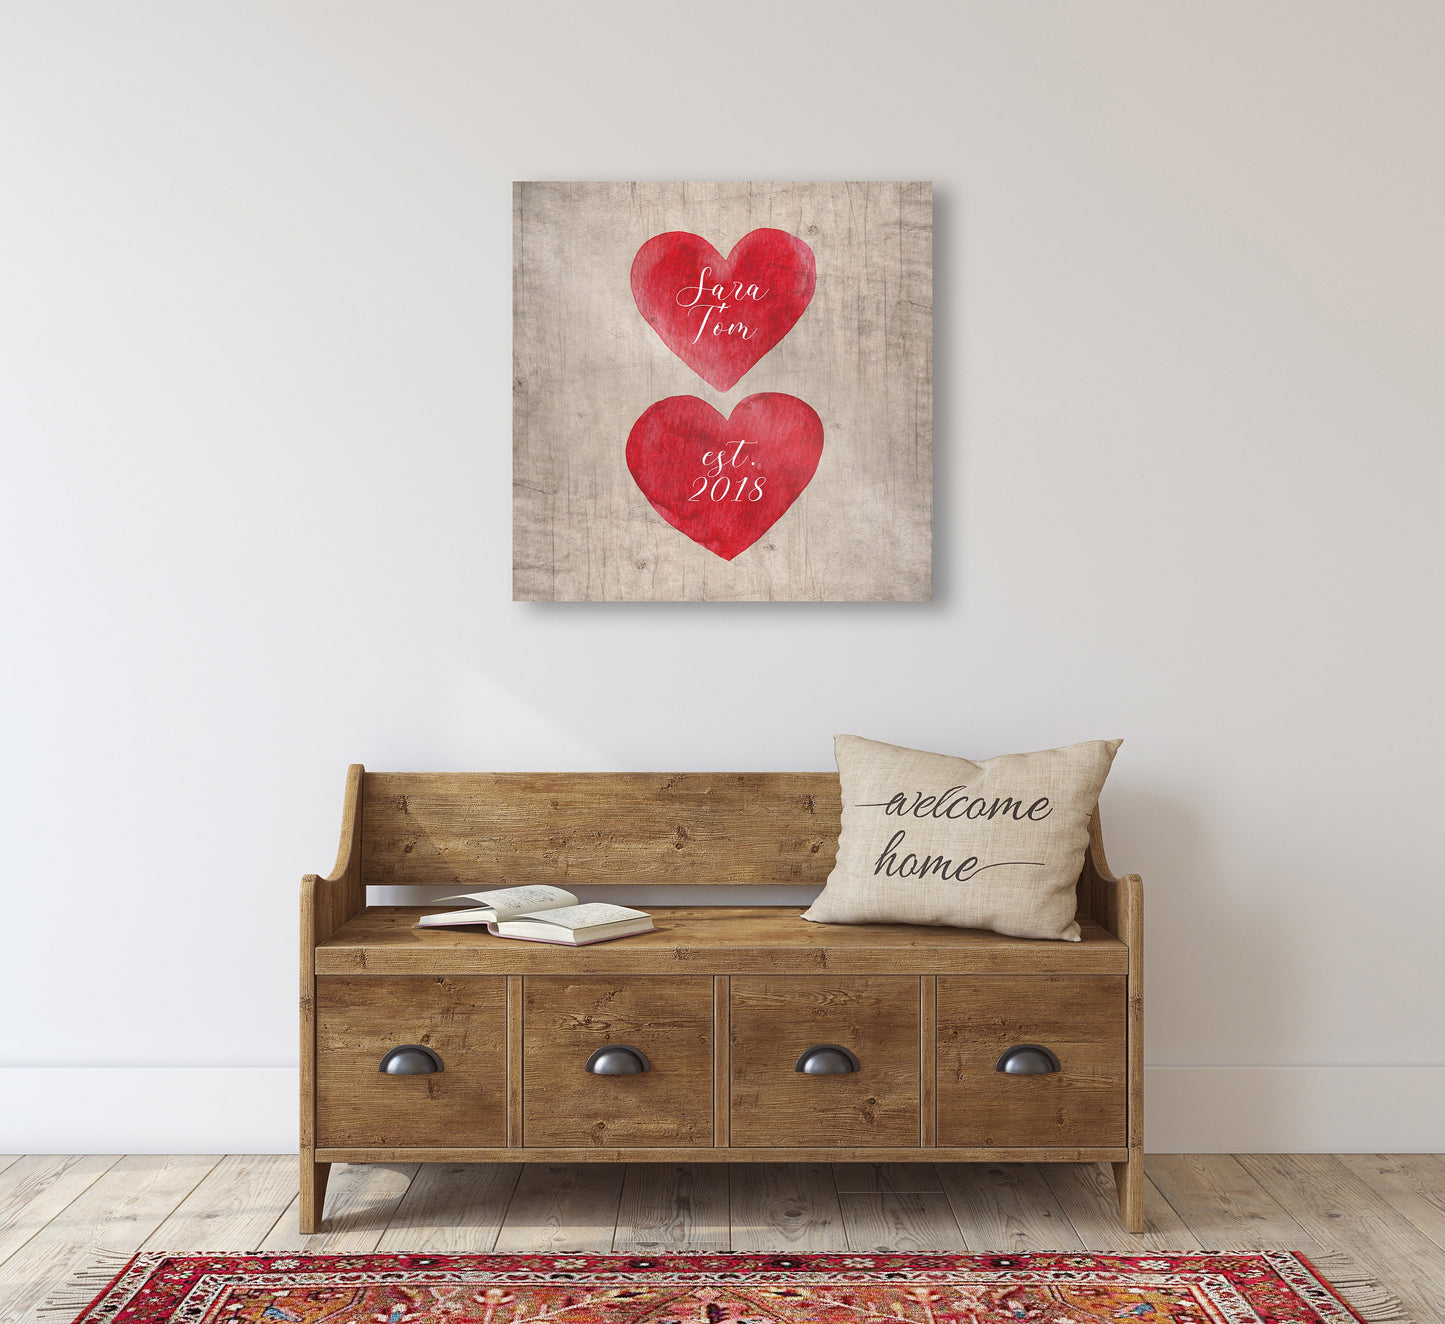 Hearts on Wood , Est. Sign, I Love You Gift, Personalized Valentines Day Decor, Romantic Wooden Gift, Couple's Name Sign, 5th Anniversary